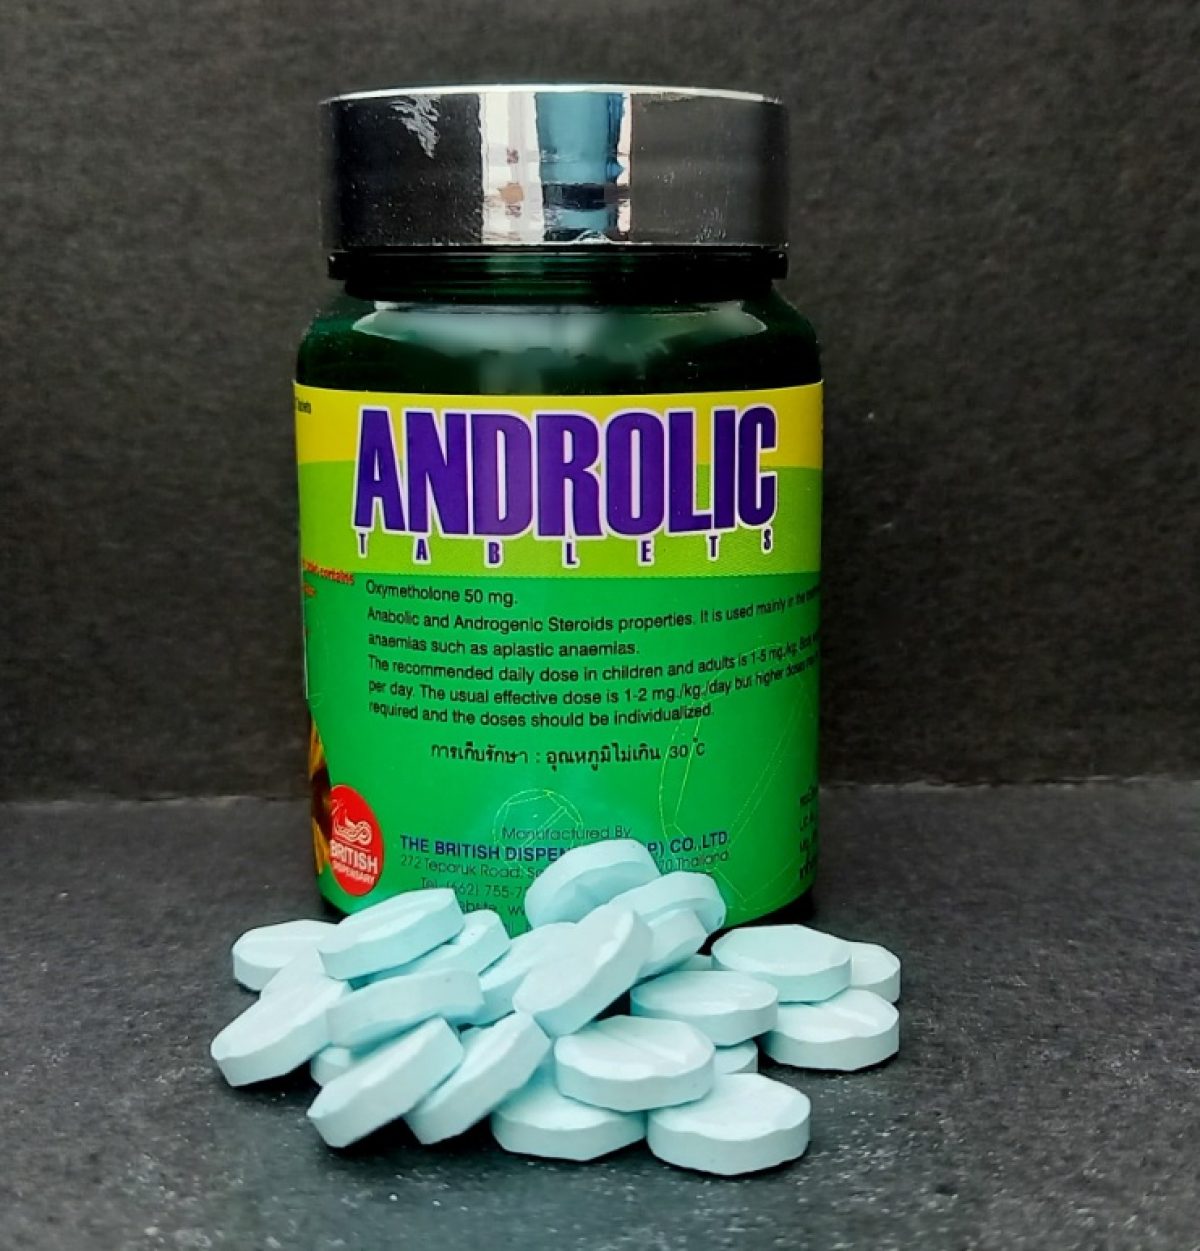 Top 10 Tips To Grow Your buy drostanolone